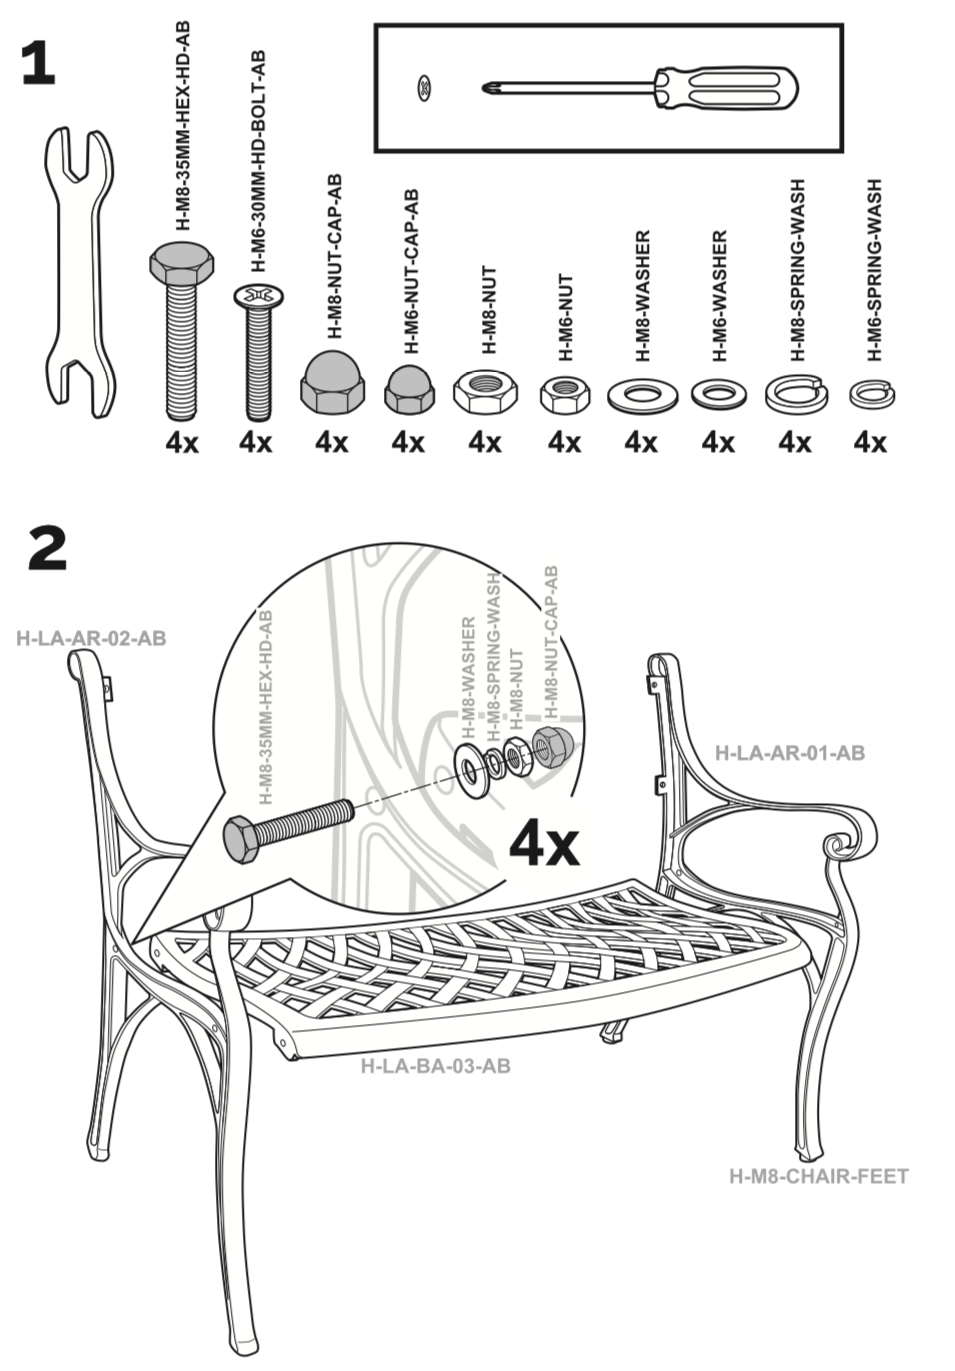 How to assemble our Garden Furniture